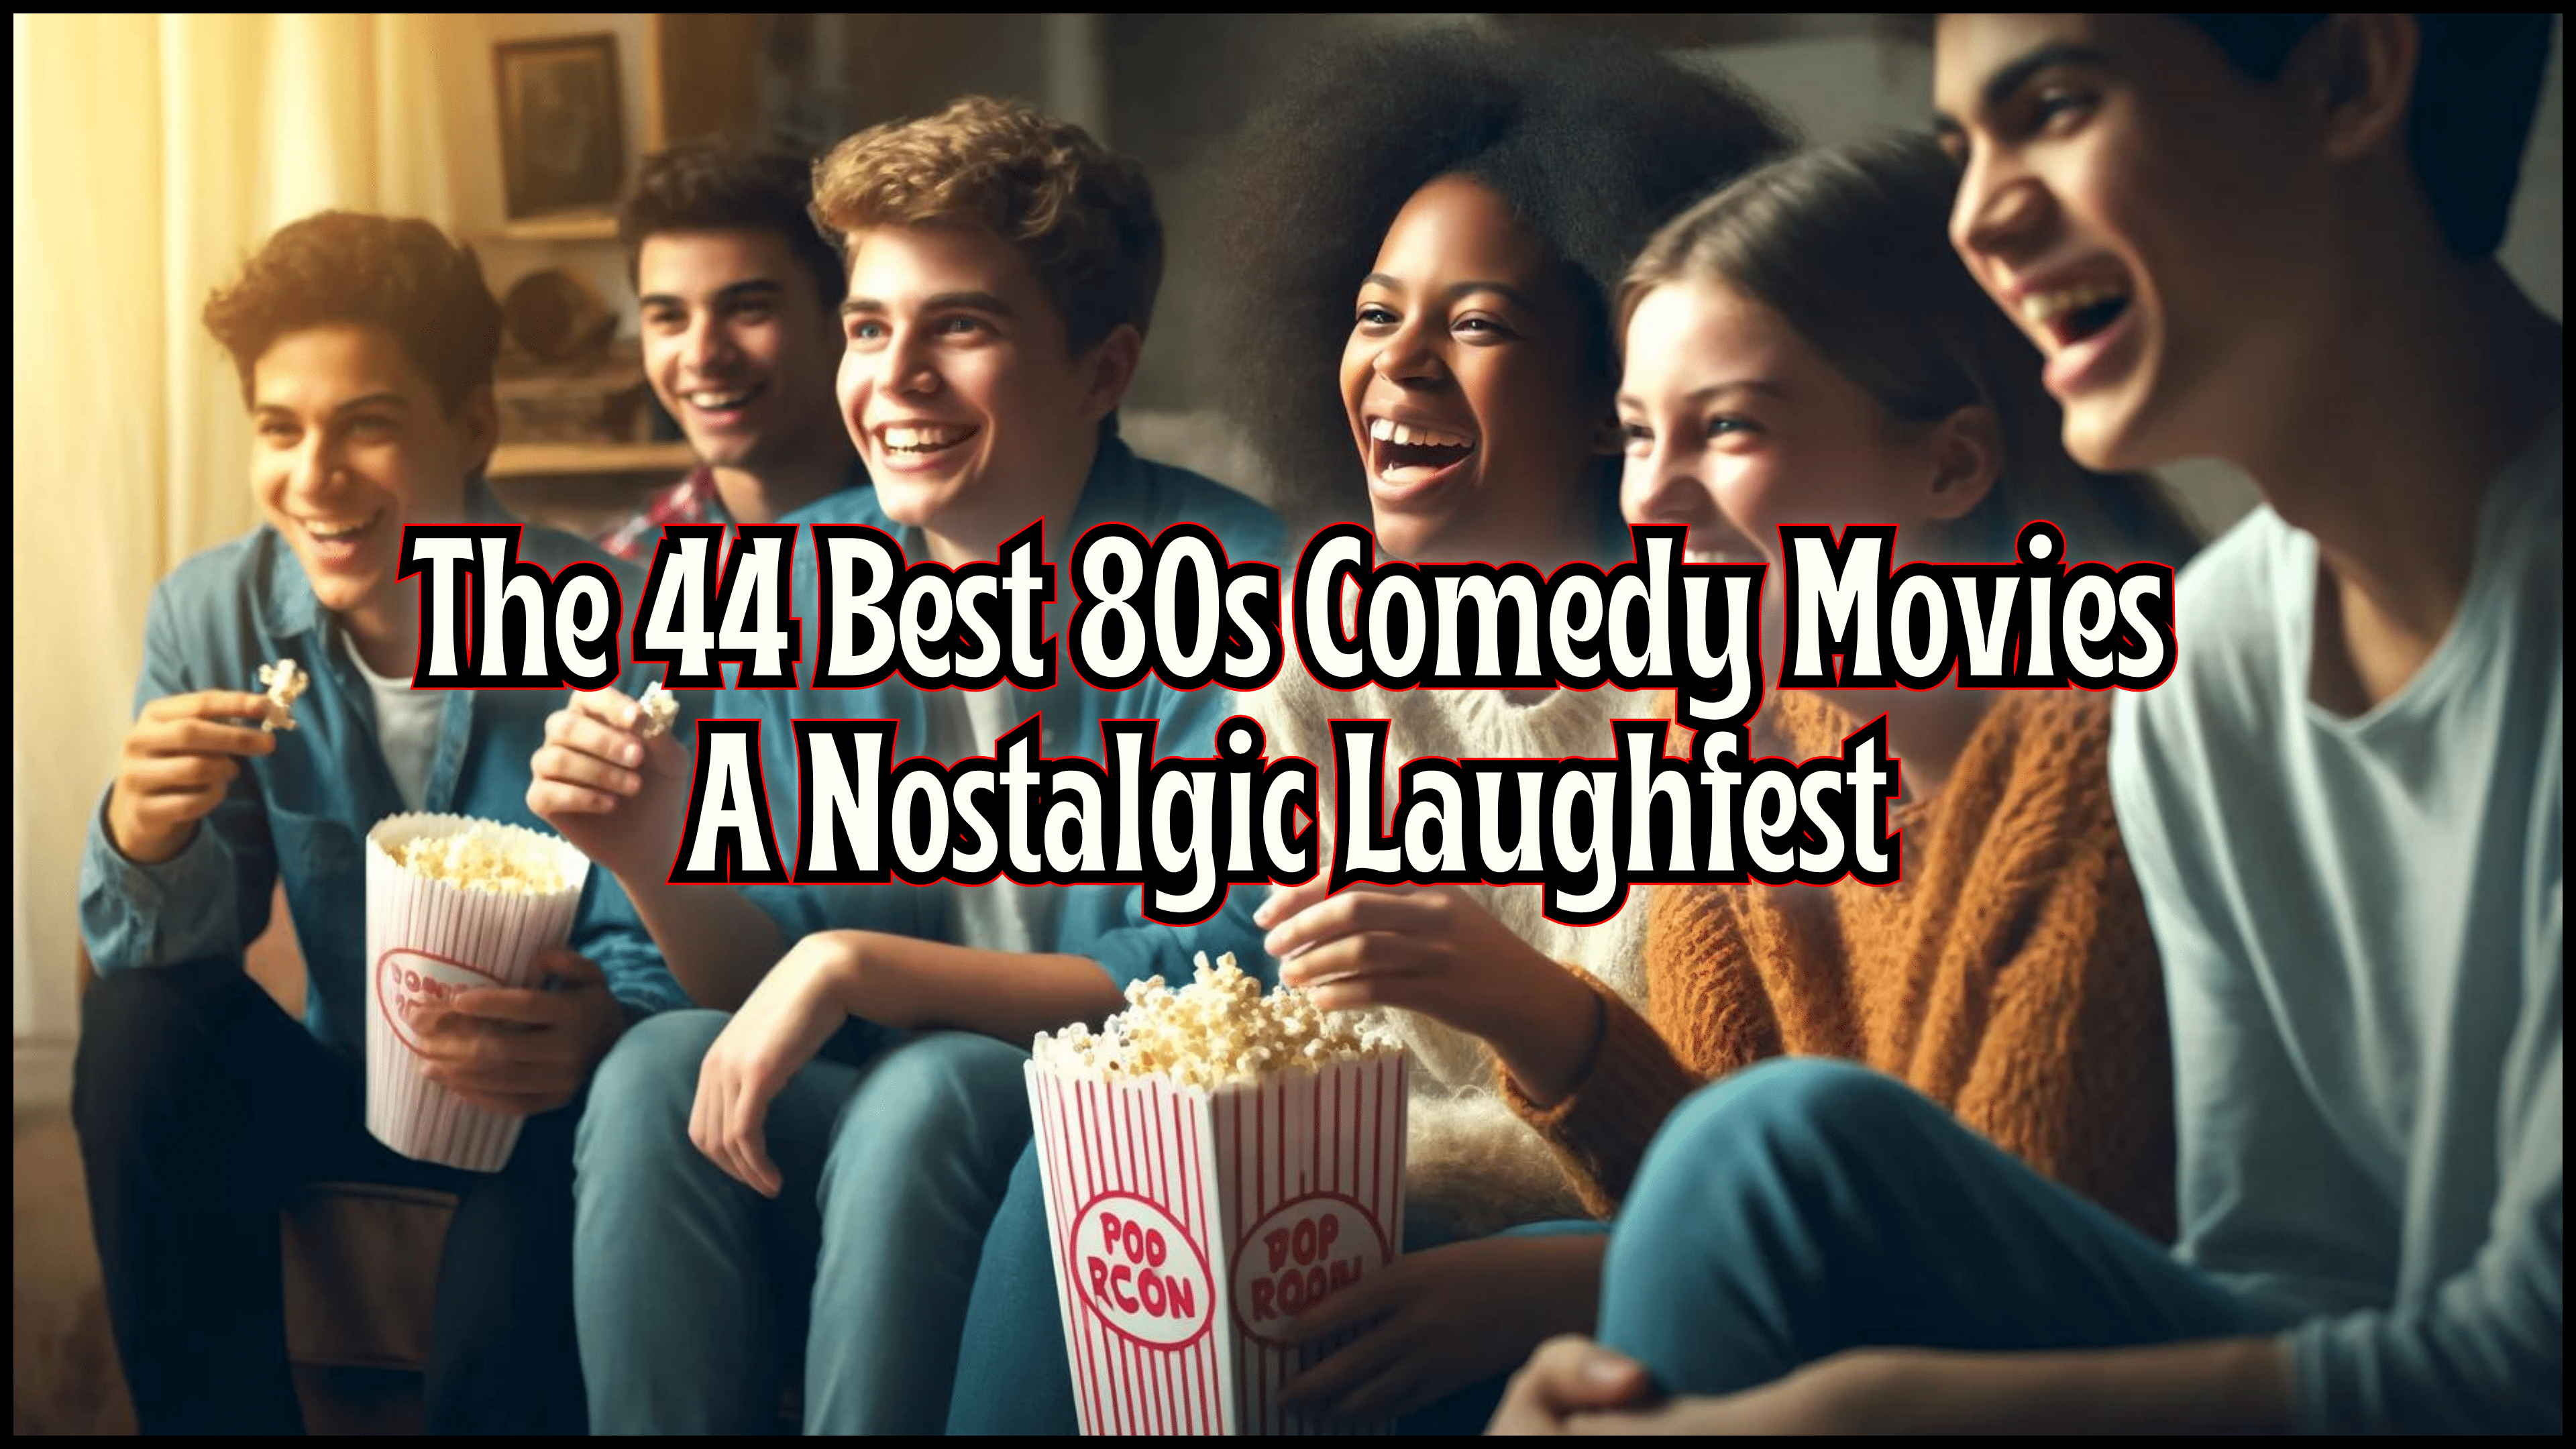 The 44 Best 80s Comedy Movies